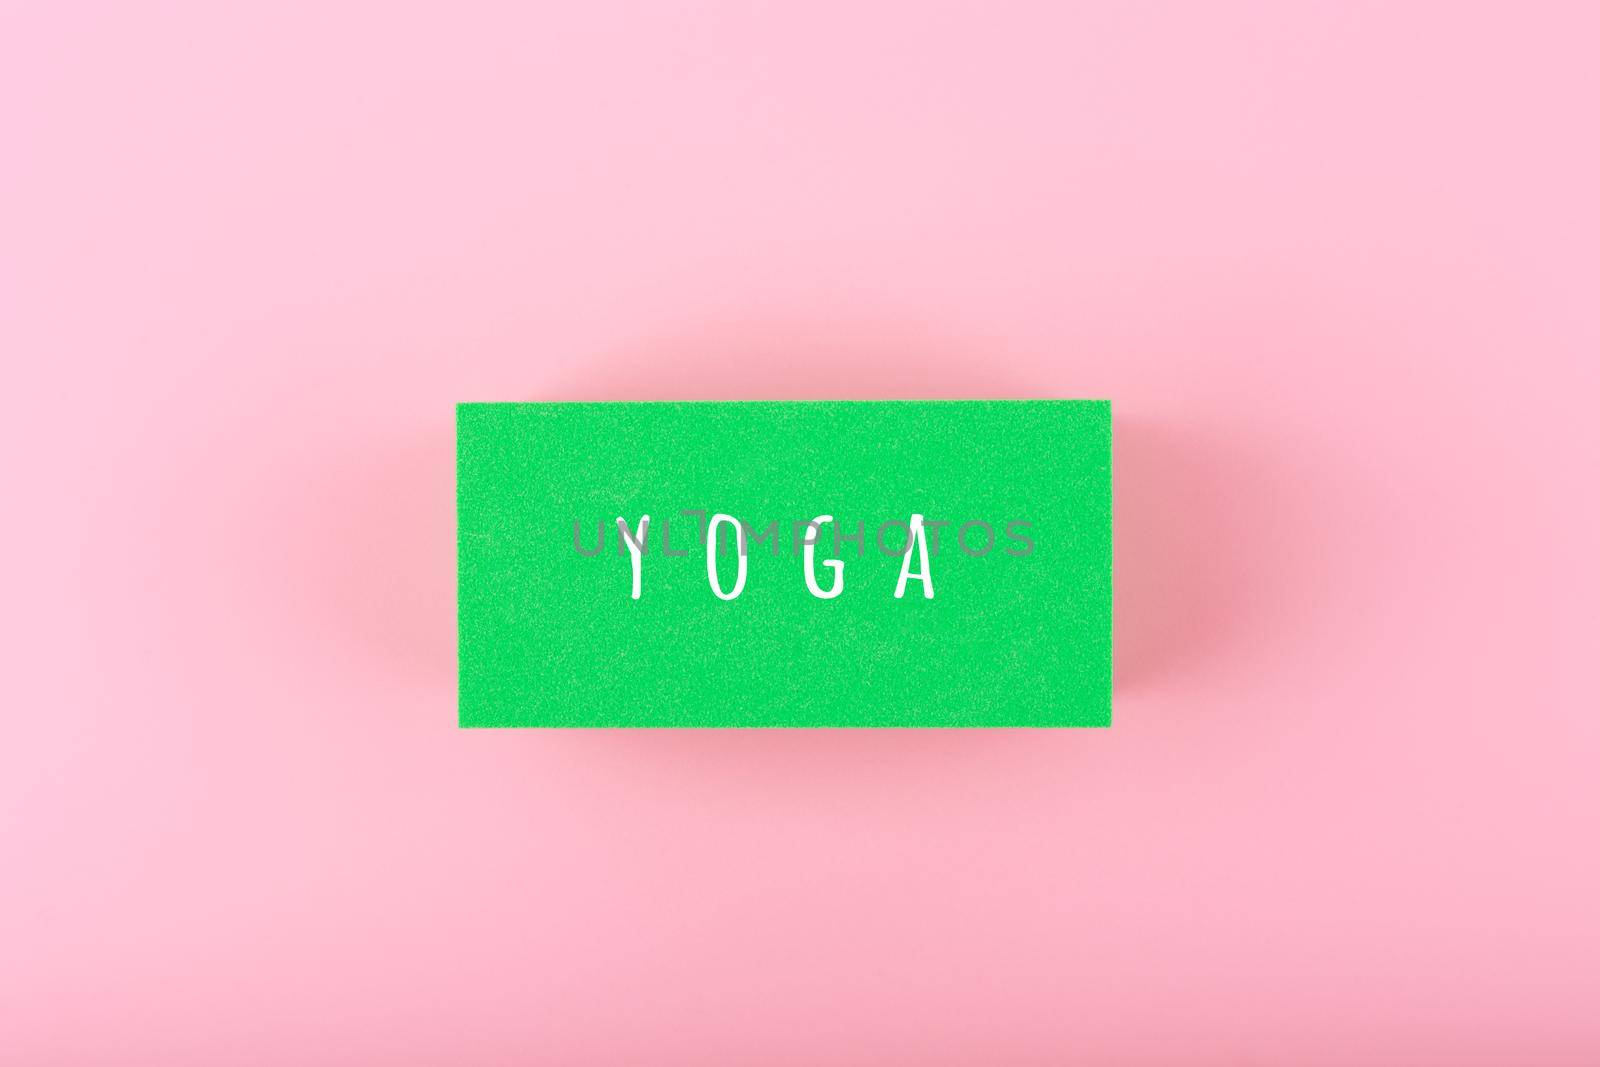 Single word yoga written on green rectangle on bright pink background. Concept of signboard for yoga class or courses or template for website or banner